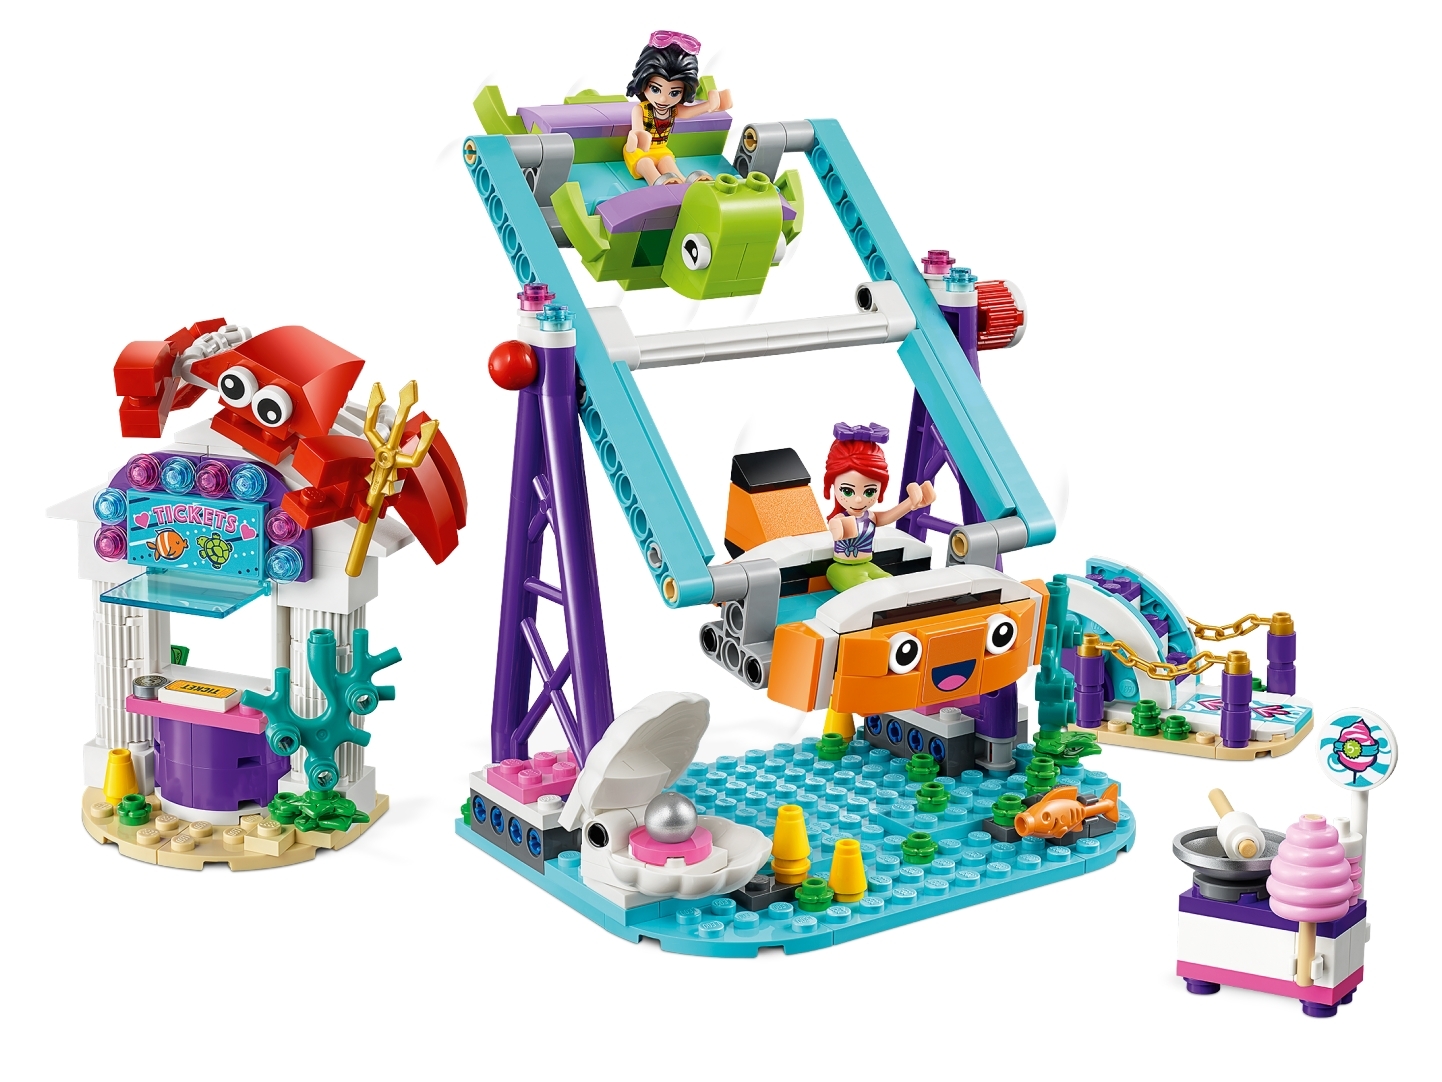 Underwater 41337 | Friends | Buy online at the LEGO® Shop US